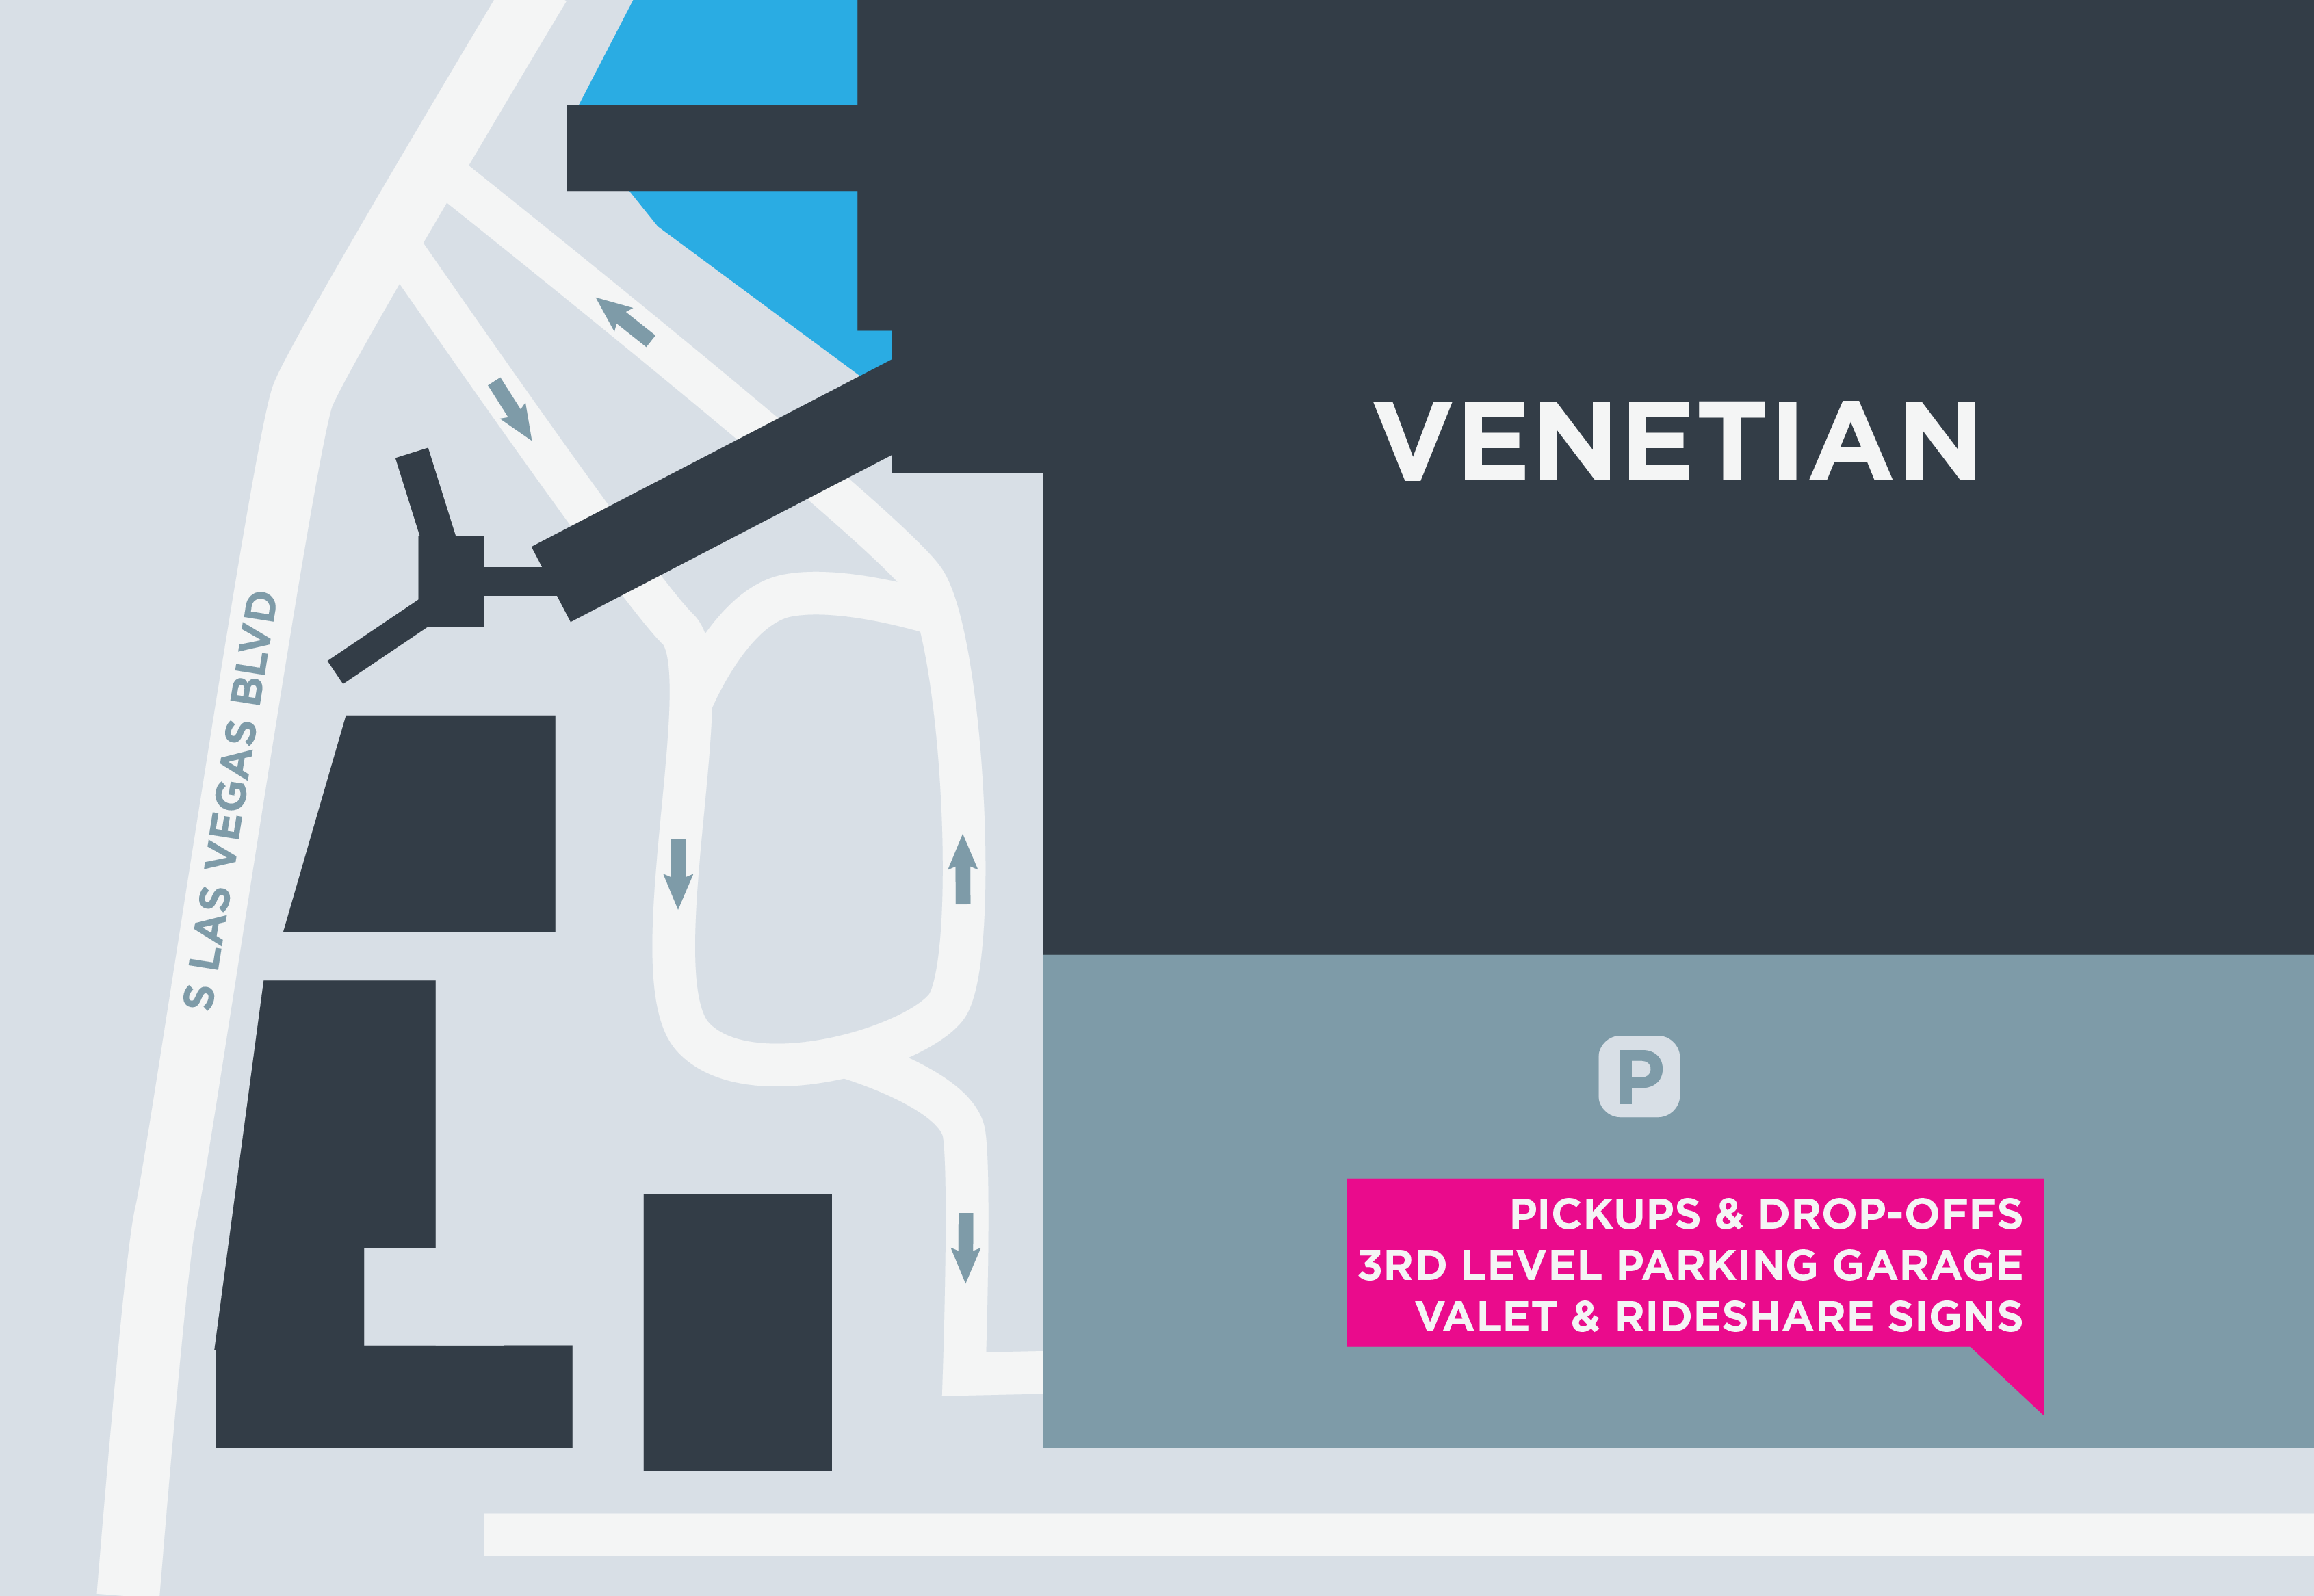 This image shows a map of the Venetian, including pickup and dropoff areas.